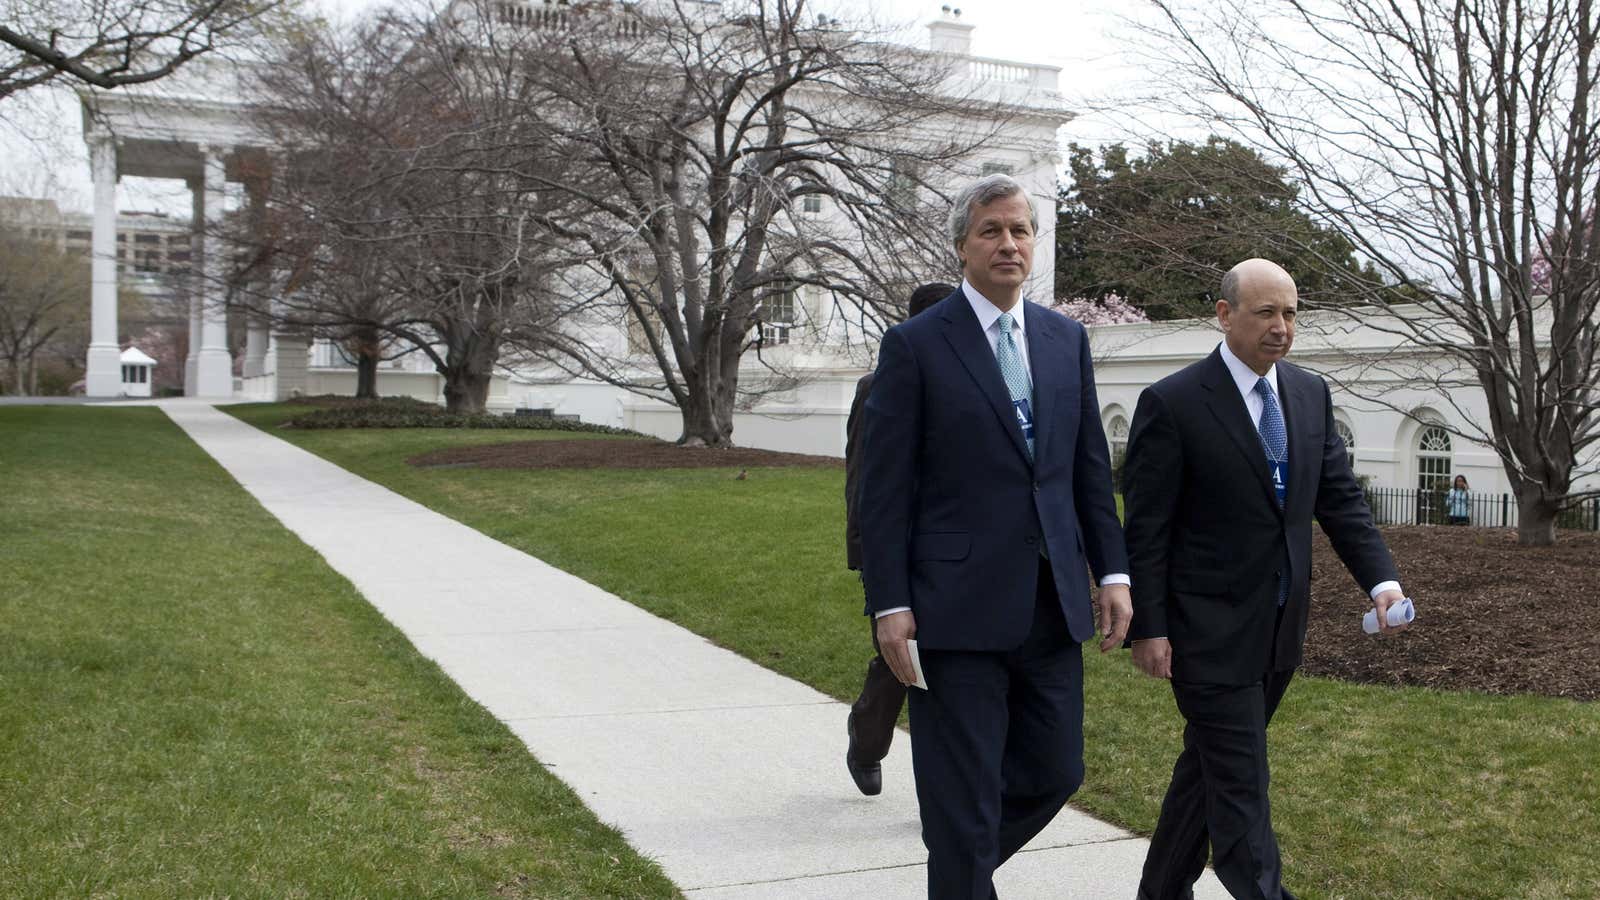 Lloyd Blankfein, pictured right, leaving the White House with JP Morgan CEO Jamie Dimon. Neither will be there today.